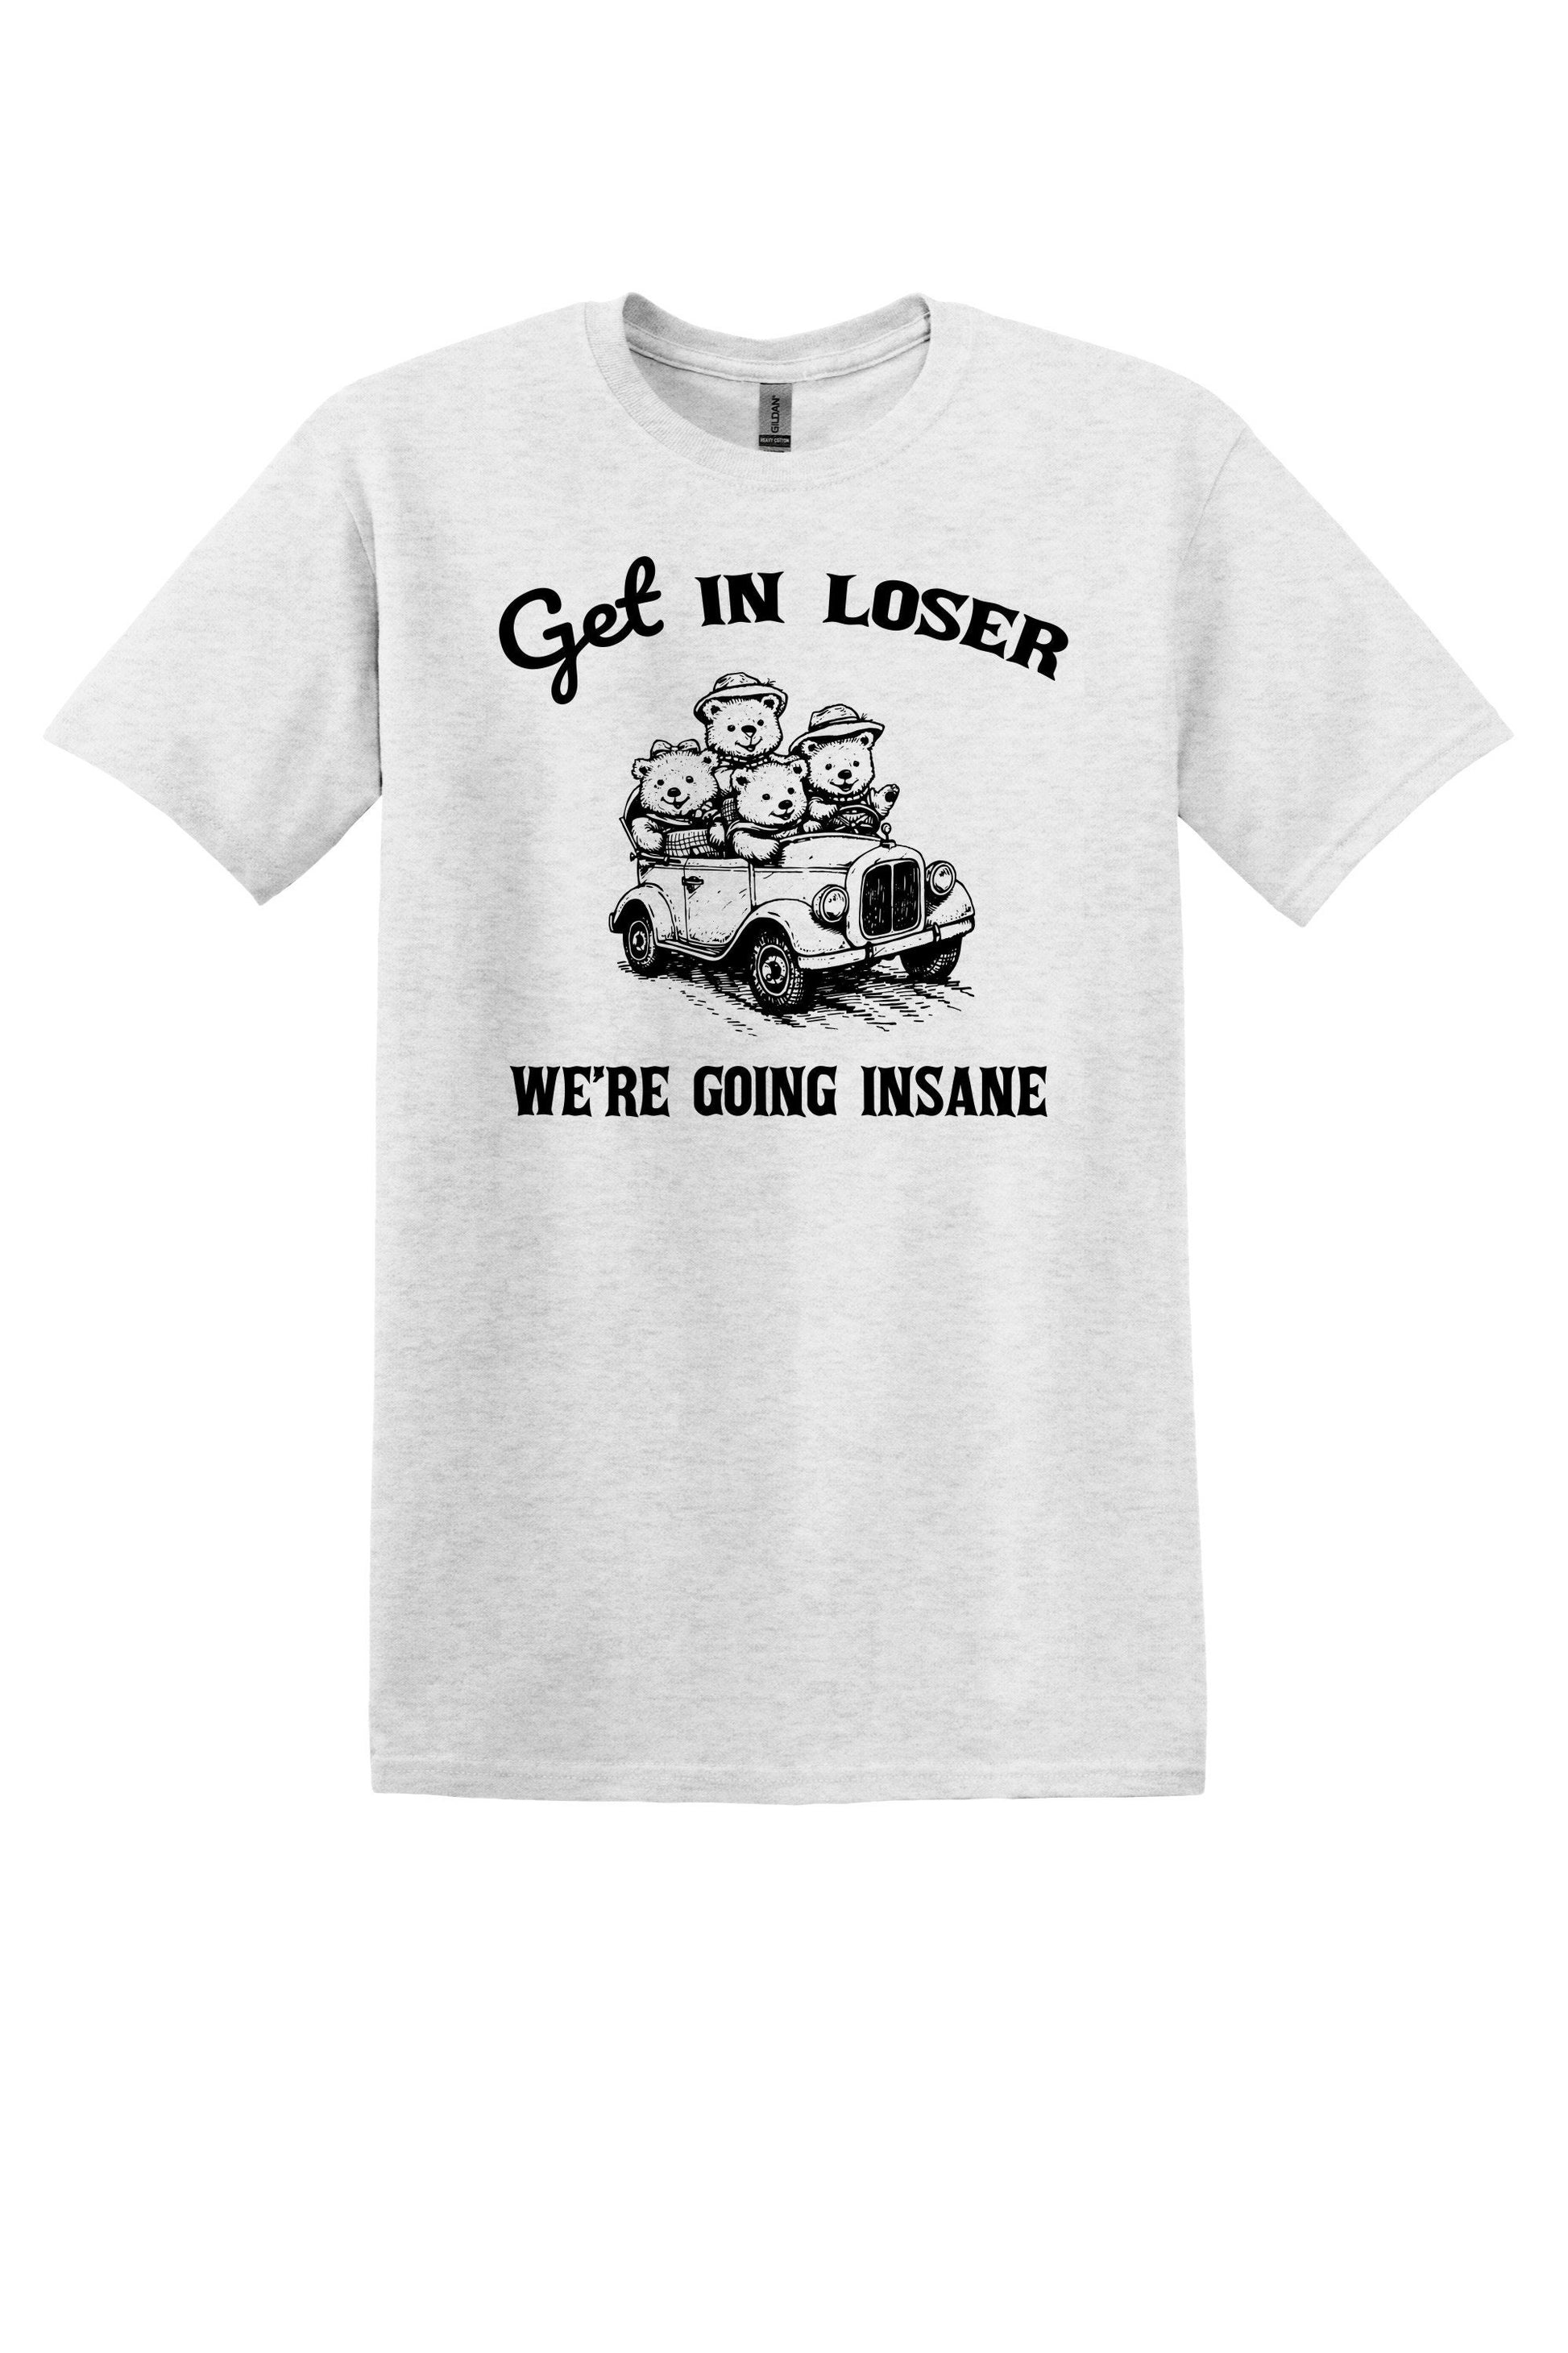 Get in Loser We're Going Insane Shirt Funny TShirt Sarcastic Vintage Graphic Tee Retro Funny Trendy shirt Weird Shirt Graphic Tee